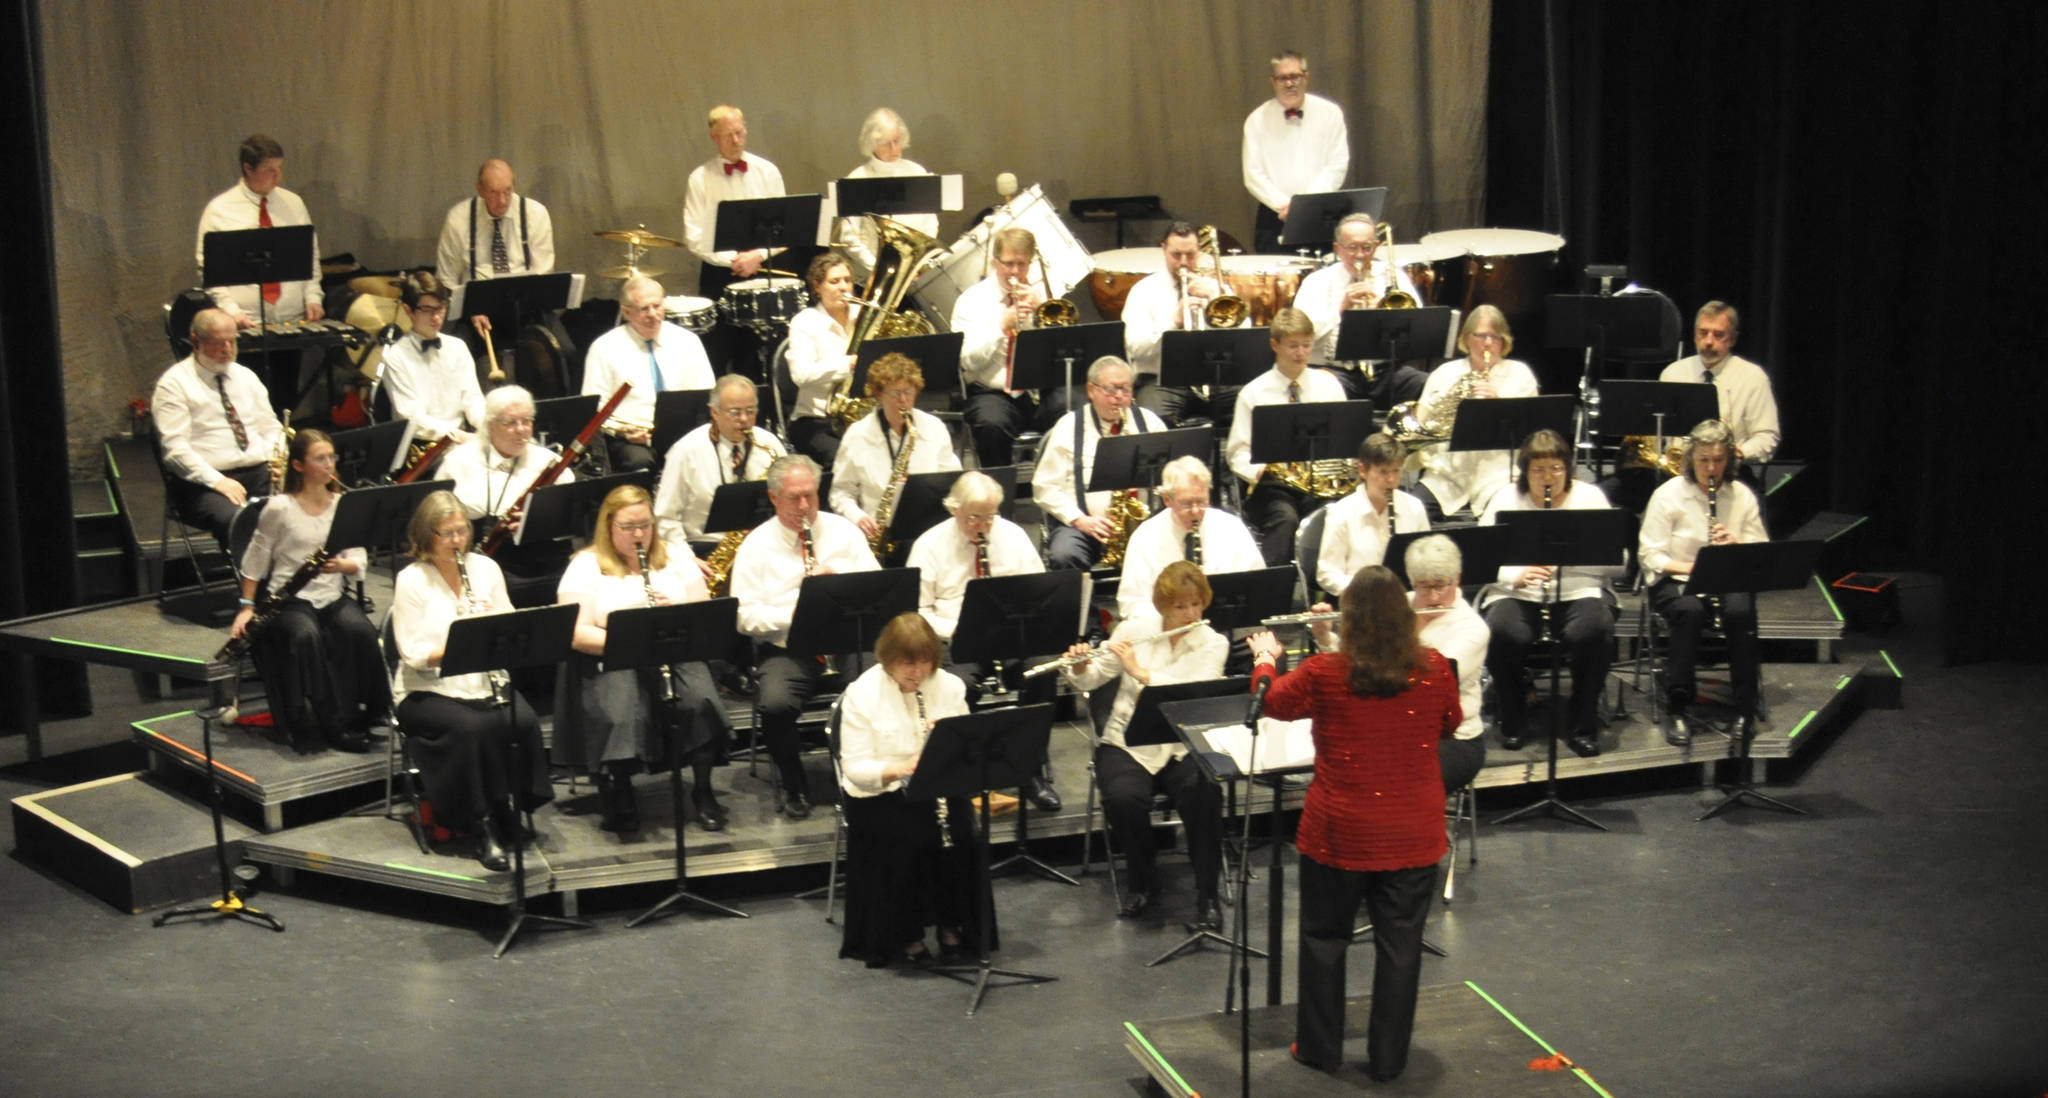 Community band to perform a variety of tunes